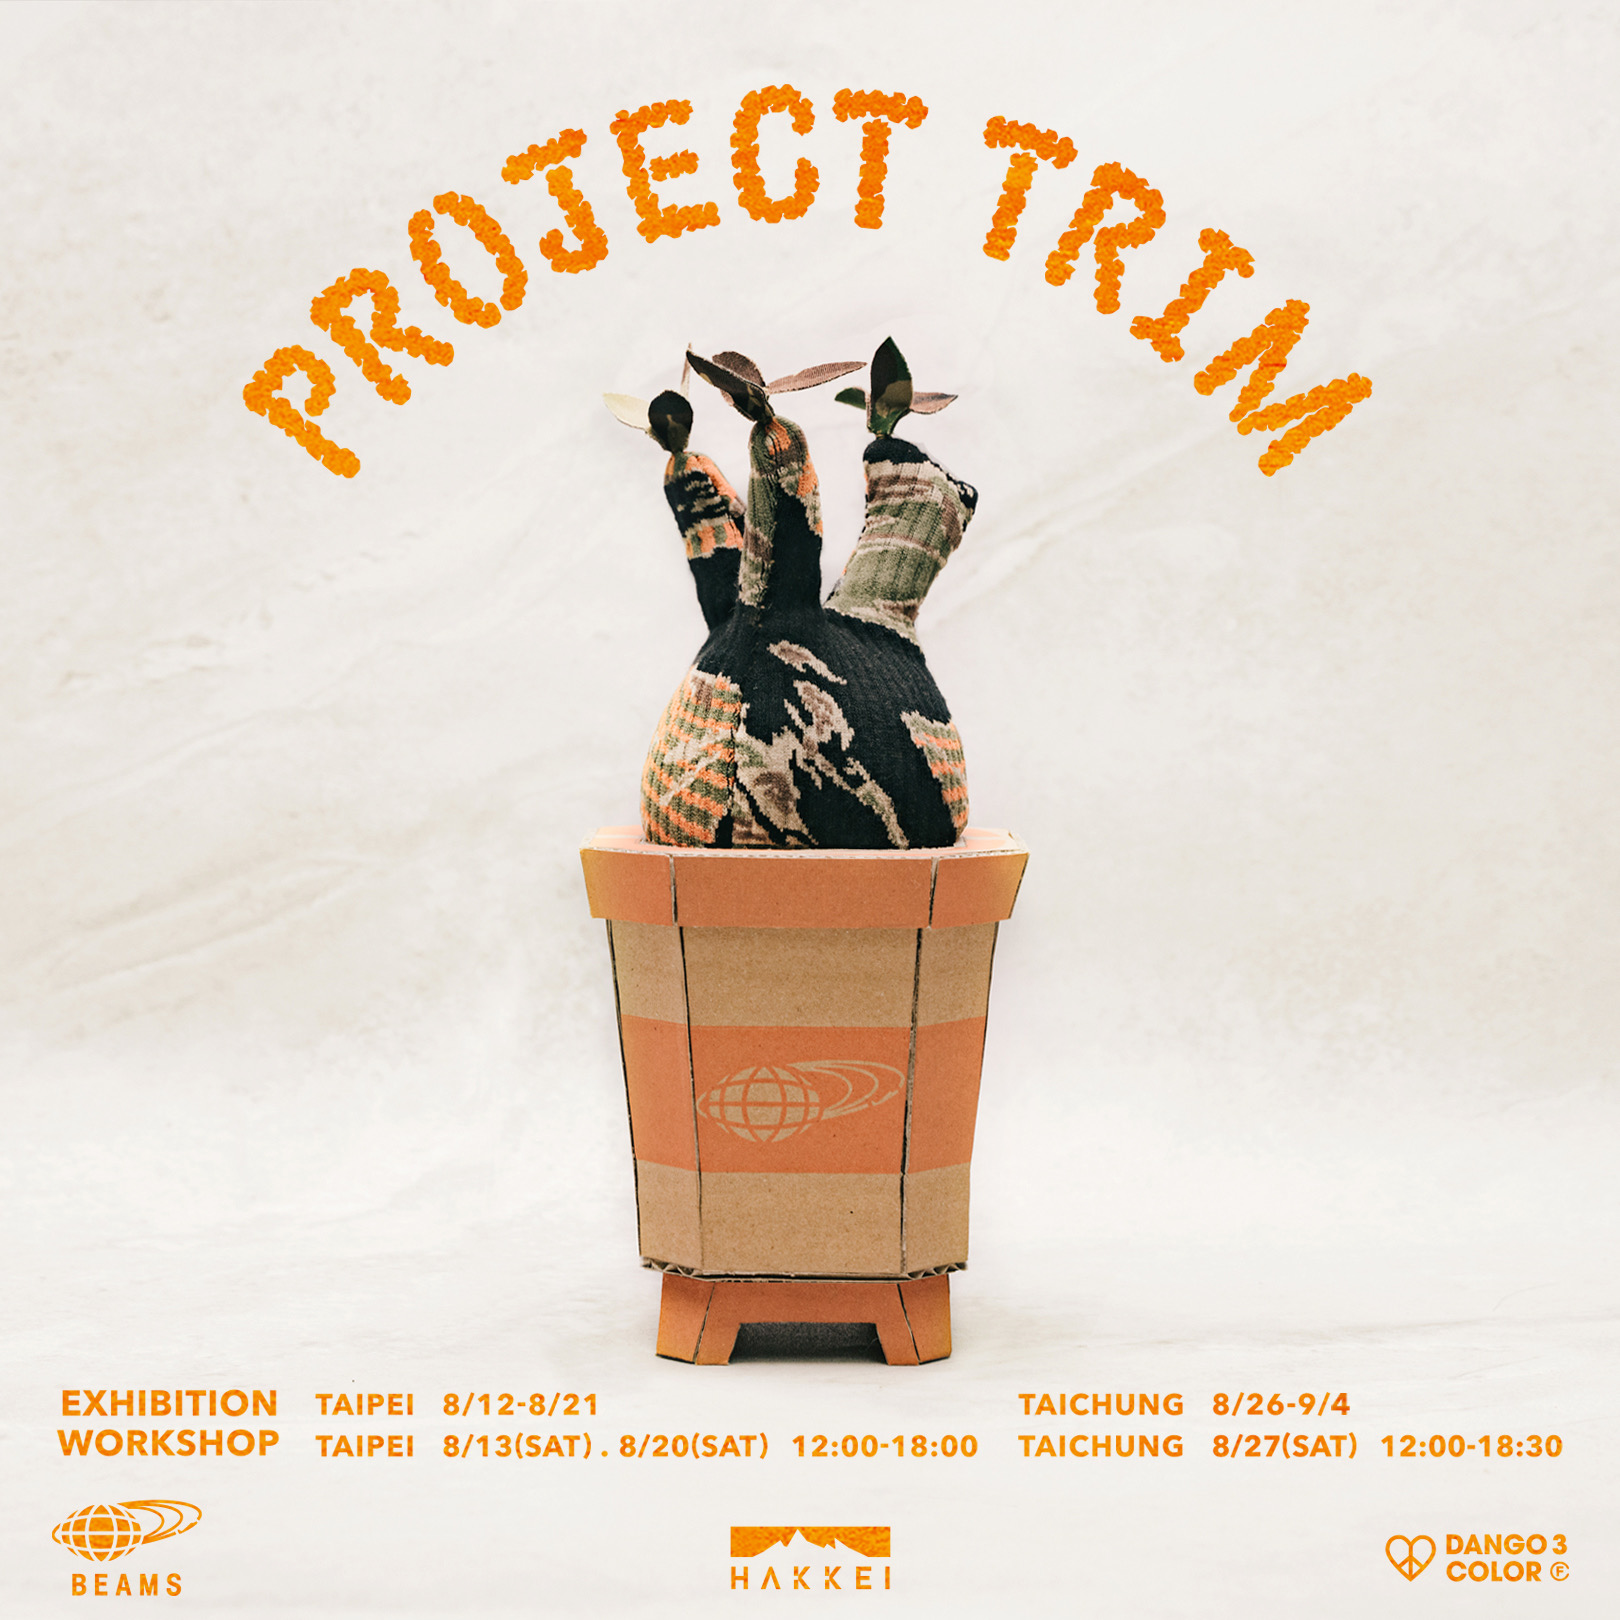 PROJECT TRIM EXHIBITION at BEAMS